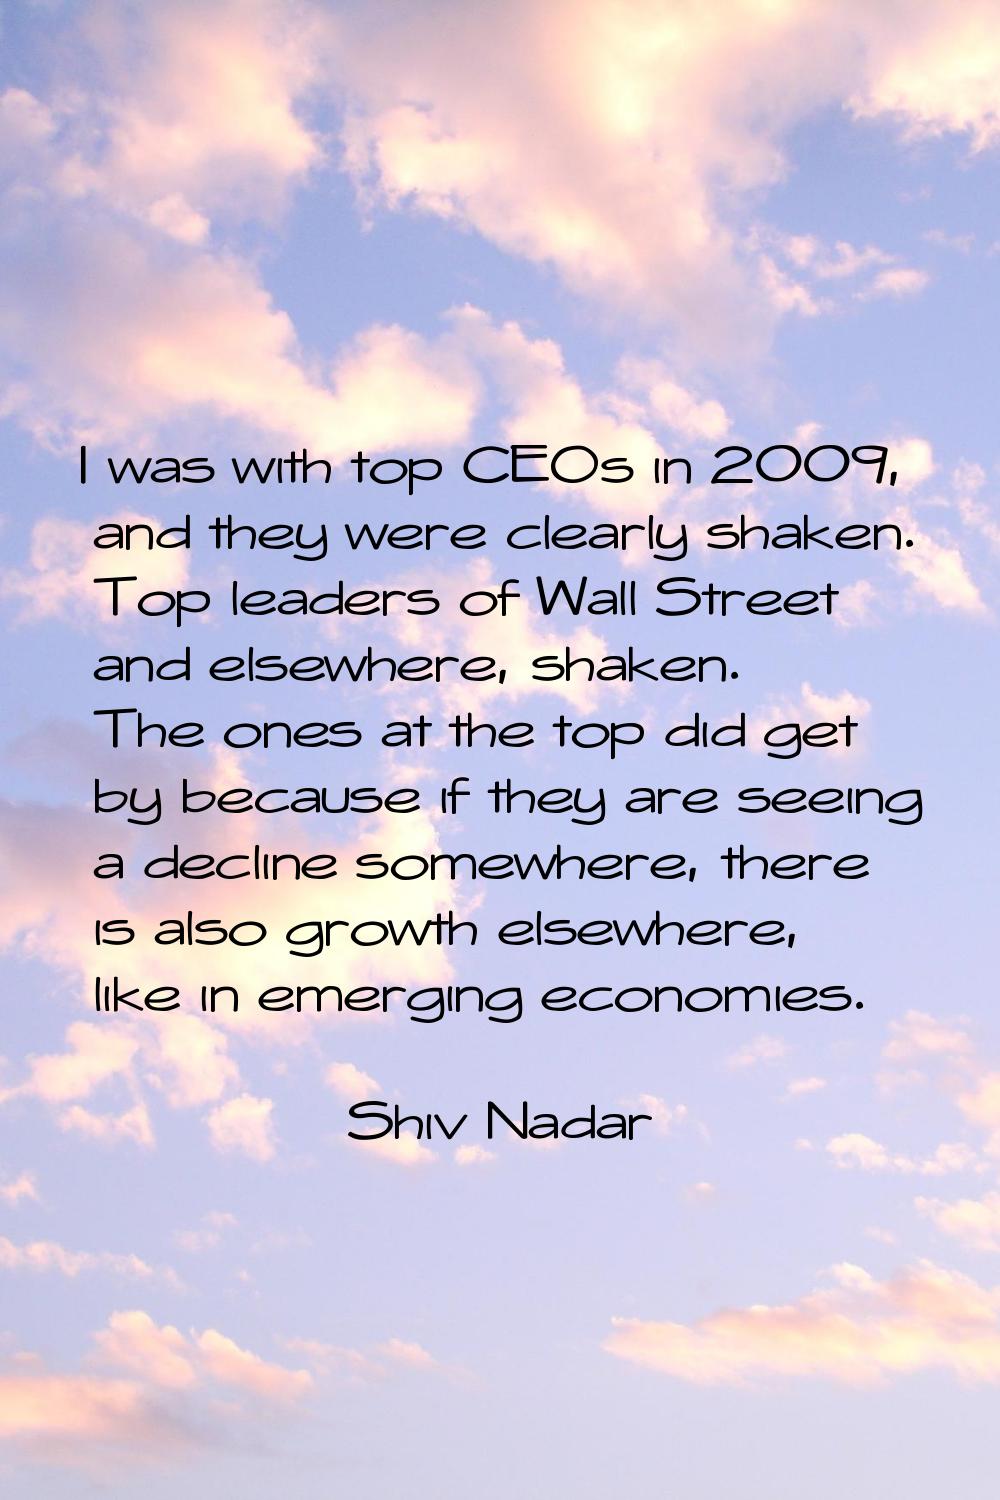 I was with top CEOs in 2009, and they were clearly shaken. Top leaders of Wall Street and elsewhere